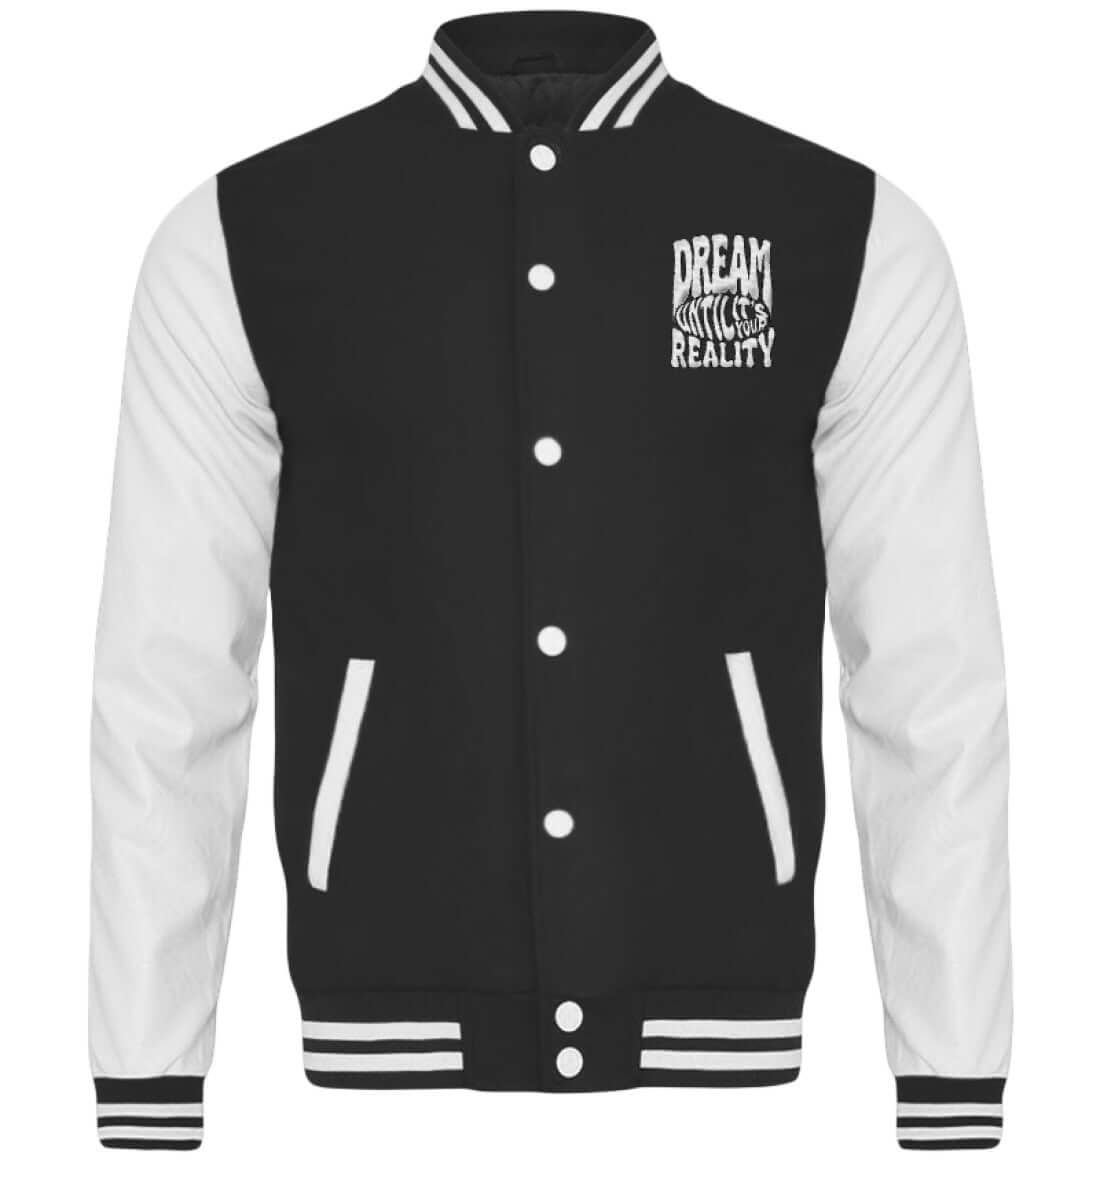 'DREAM UNTIL IT'S YOUR REALITY' COLLEGE-JACKET - GODVIBES